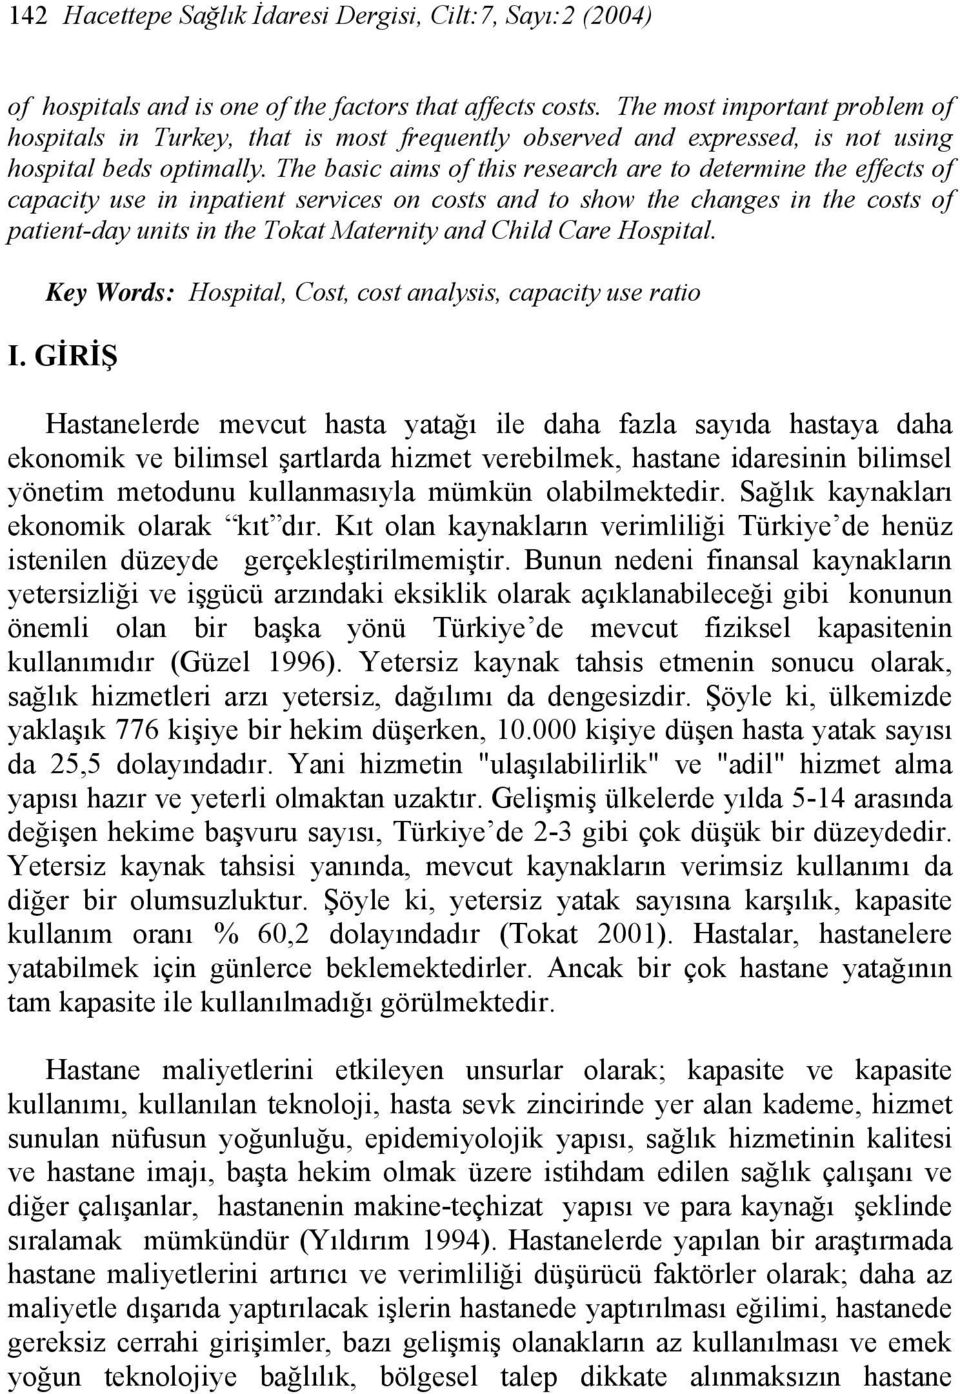 The basic aims of this research are to determine the effects of capacity use in inpatient services on costs and to show the changes in the costs of patient-day units in the Tokat Maternity and Child